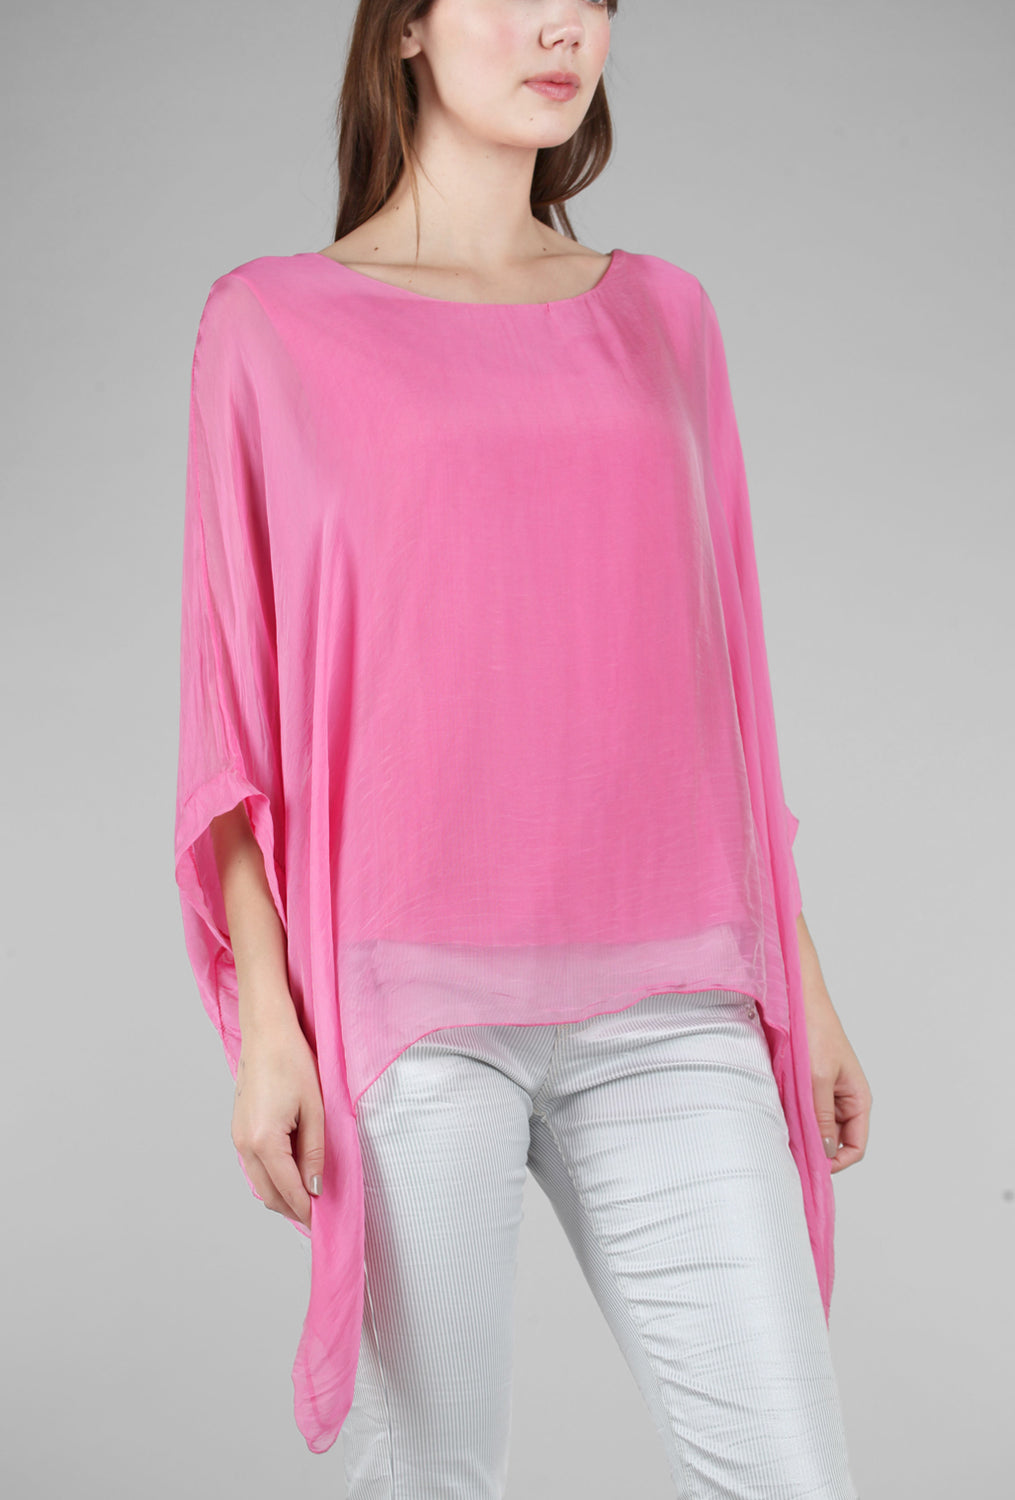 Silky Overlay Blouse, Hot Pink